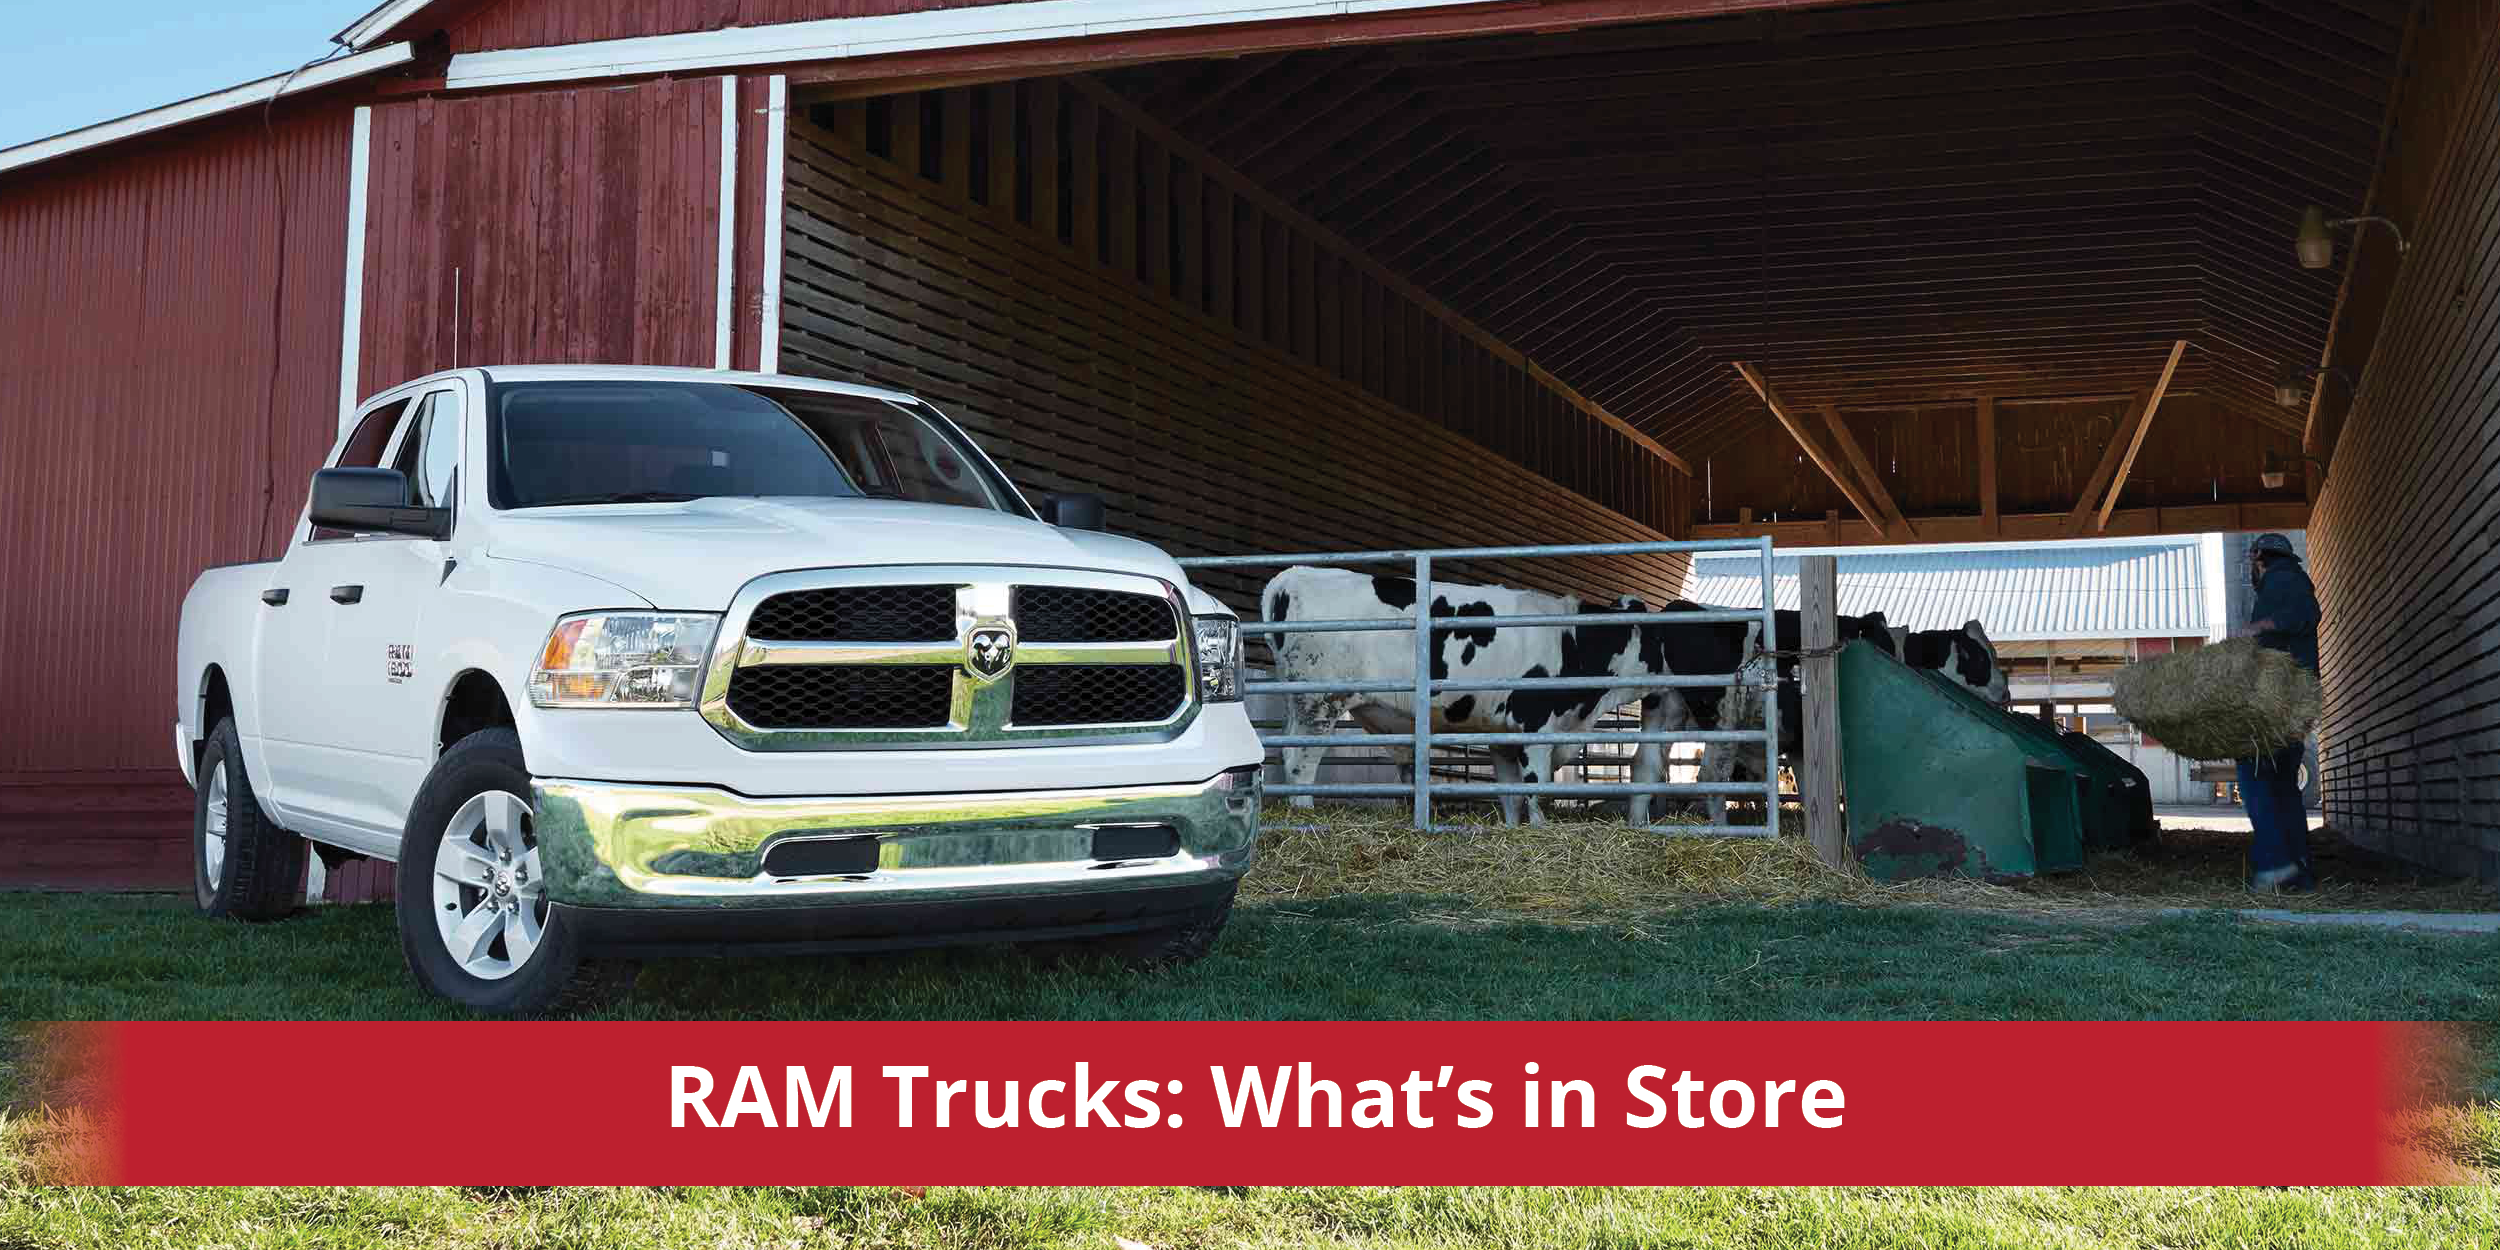 What's in store for RAM trucks